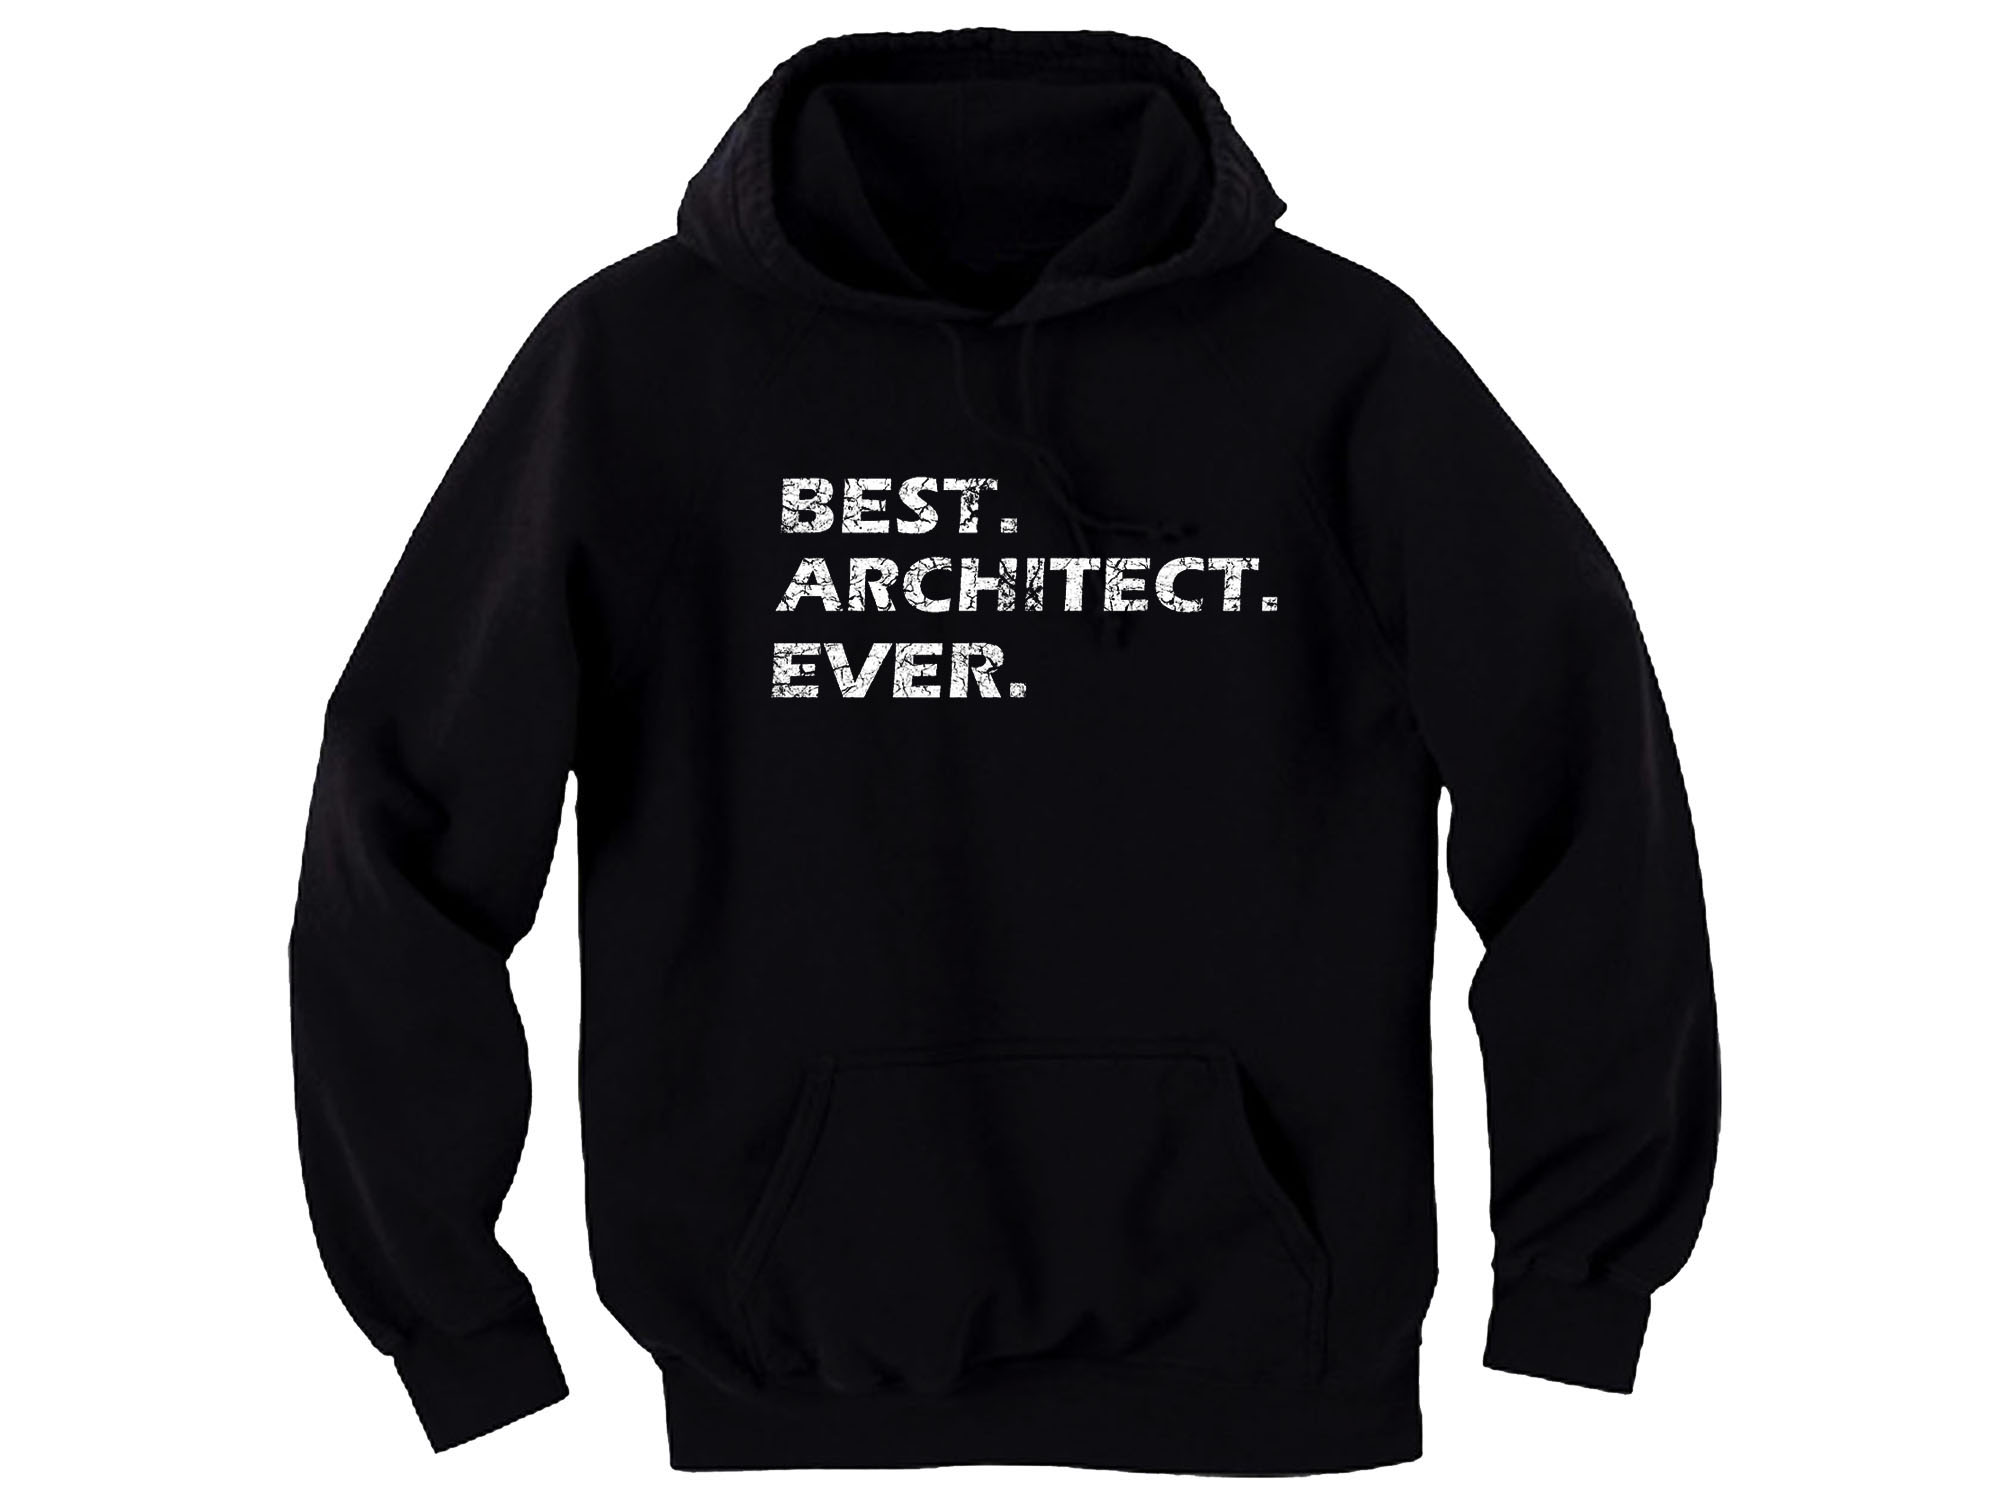 Best architect ever distressed print hoodie coworker,father,friend gift